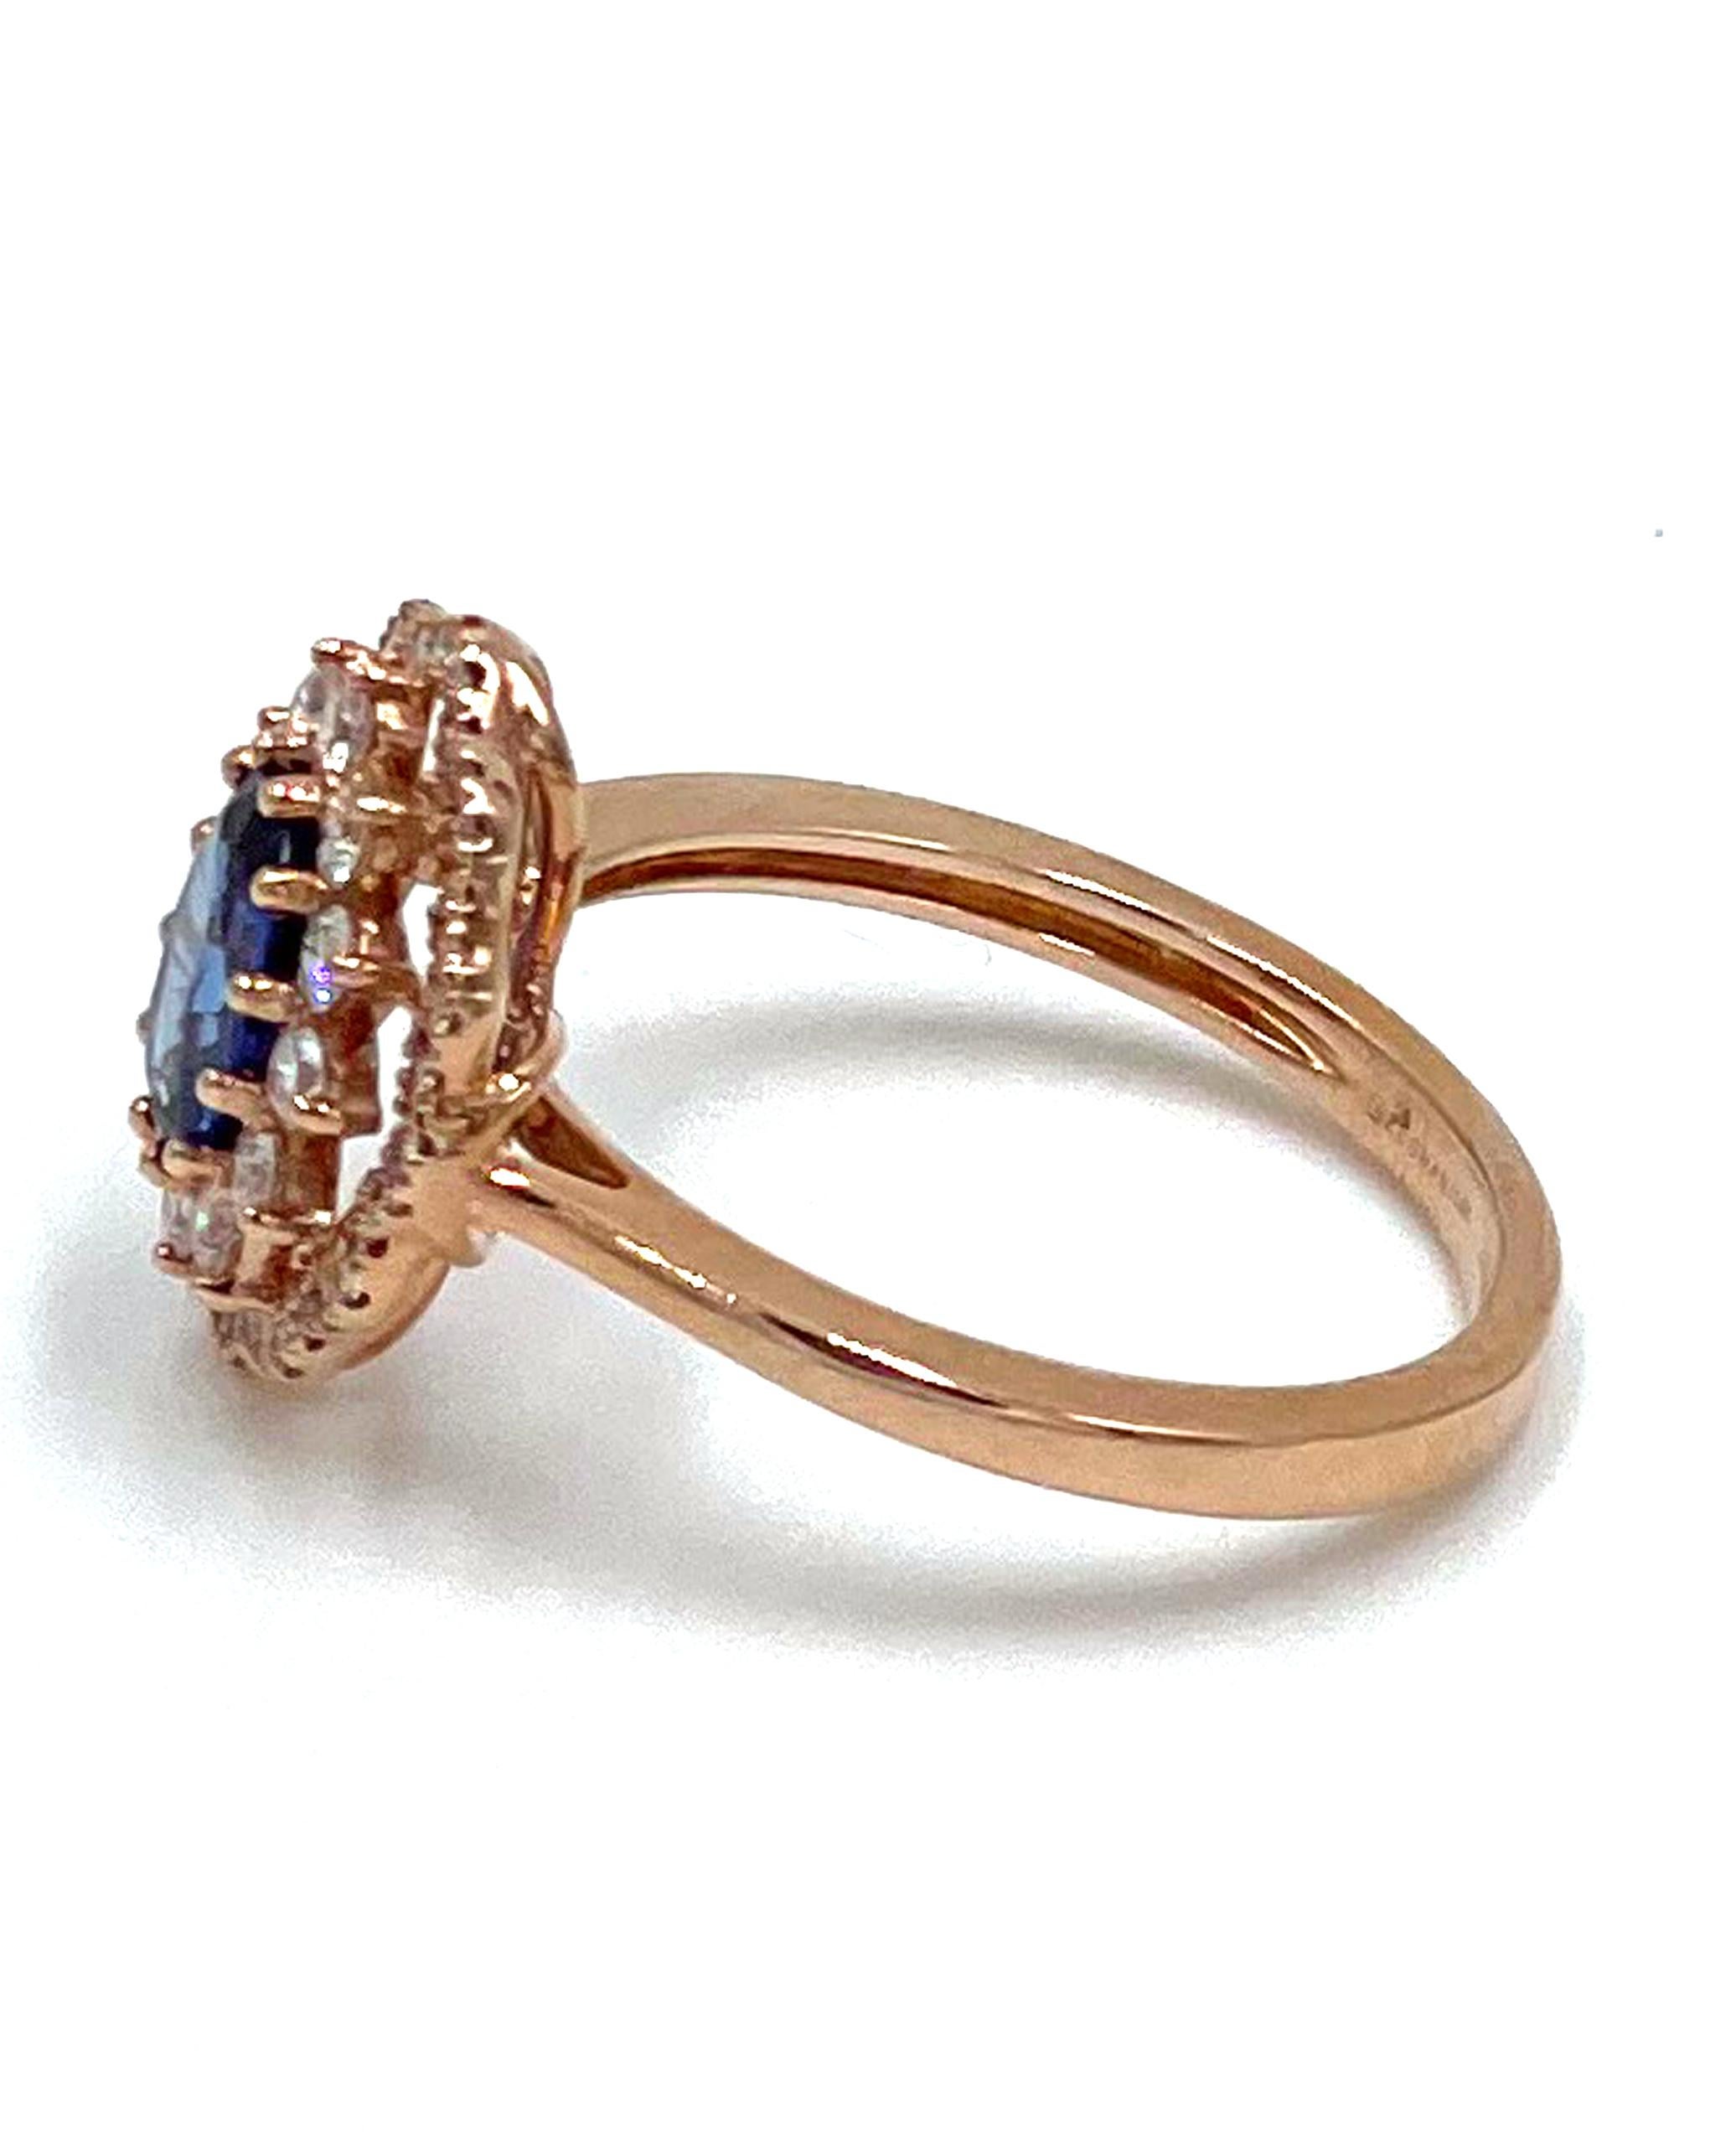 14K rose gold ring made by Zeghani featuring one oval shape blue sapphire 0.84 carat.  The sapphire is surrounded by 50 round brilliant-cut diamonds 0.41 carat total weight. 

* Style No. ZR2012
* The diamonds are H color, SI1 clarity.
* Finger size